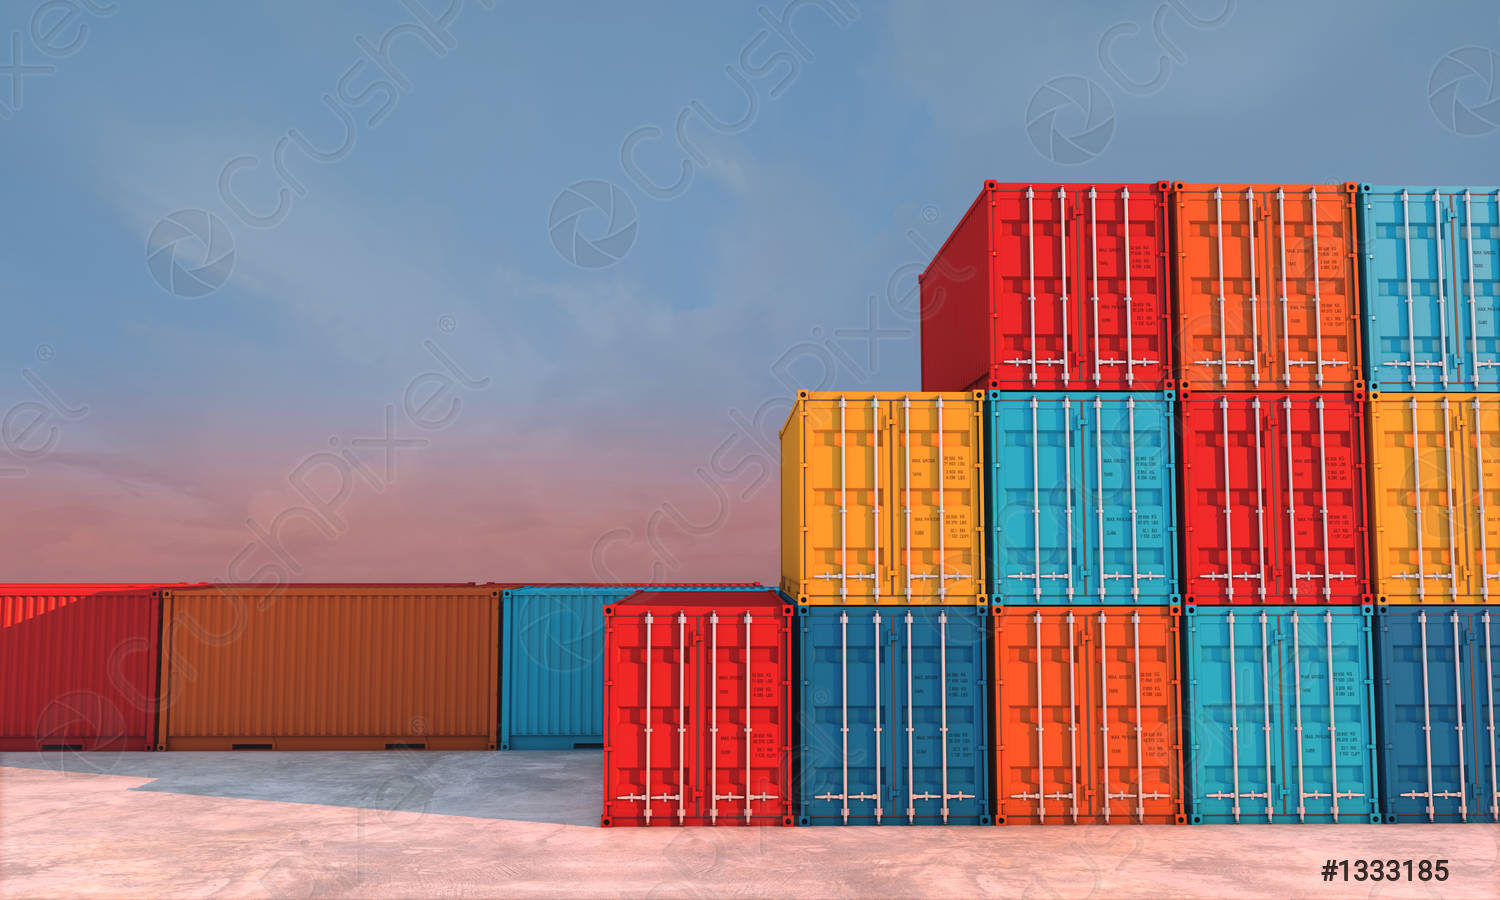 stack-containers-box-cargo-freight-1333185